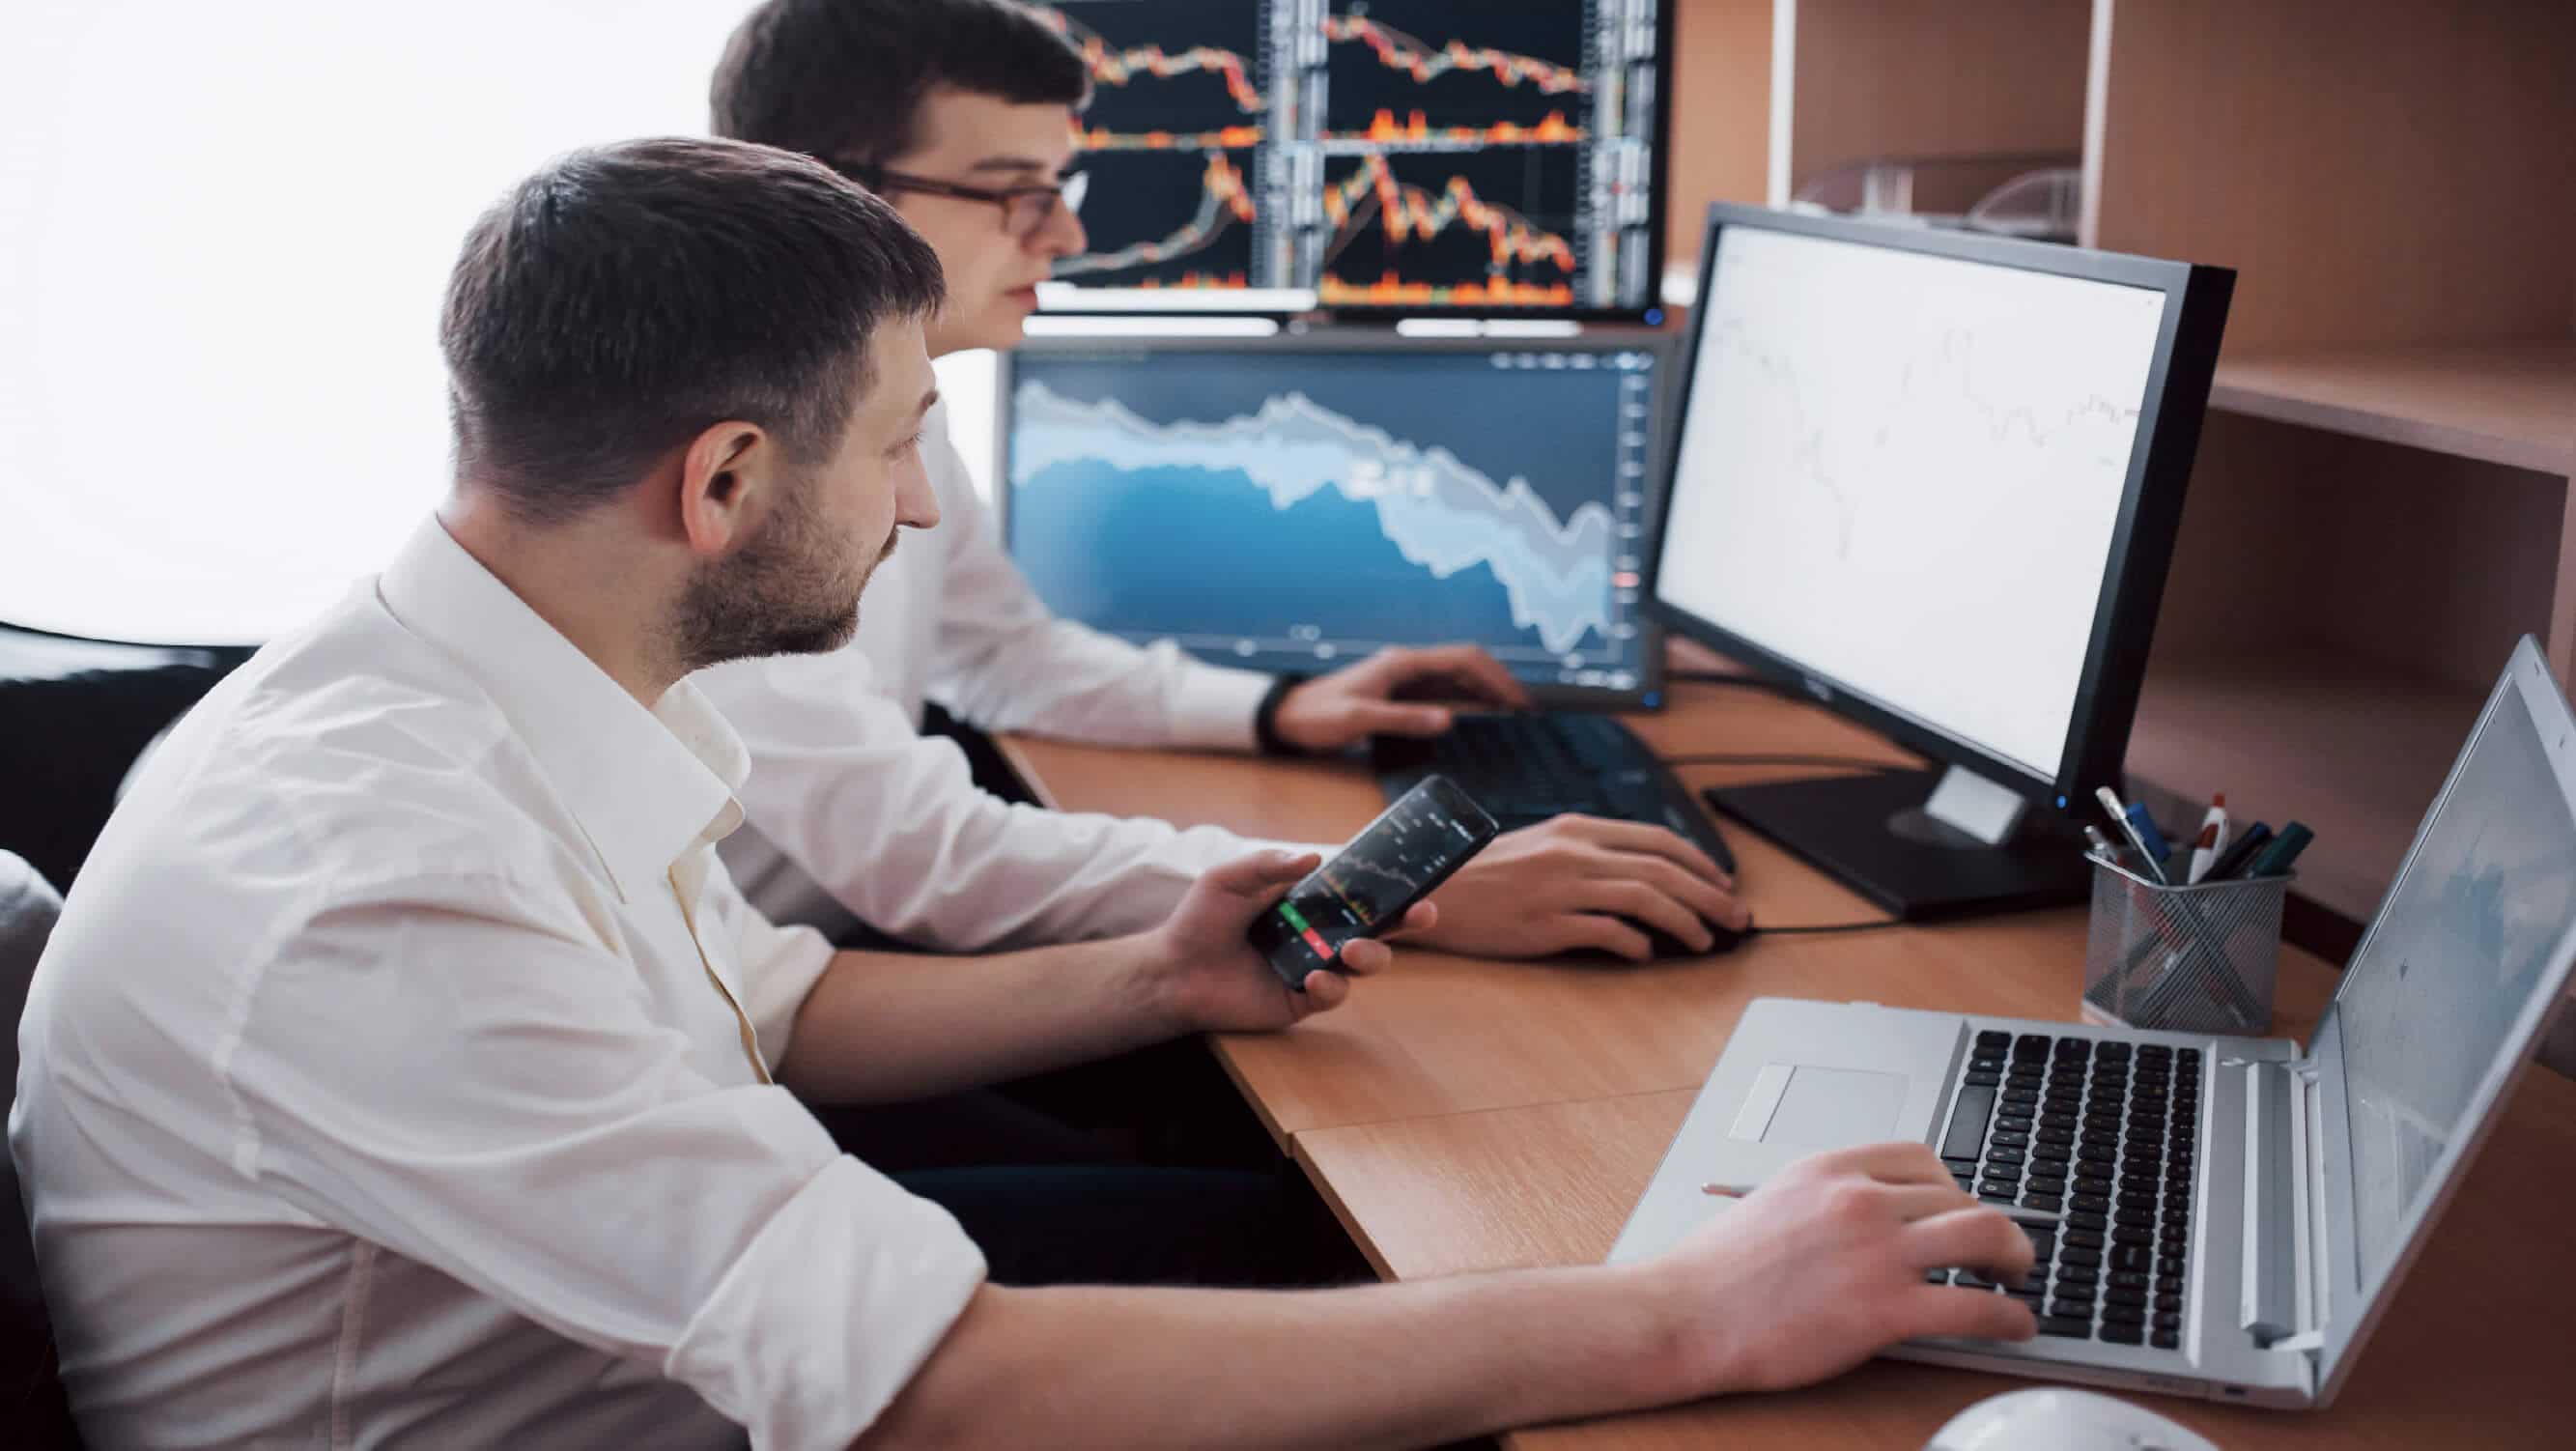 How to Set up Your Trading Screens for Day Trading